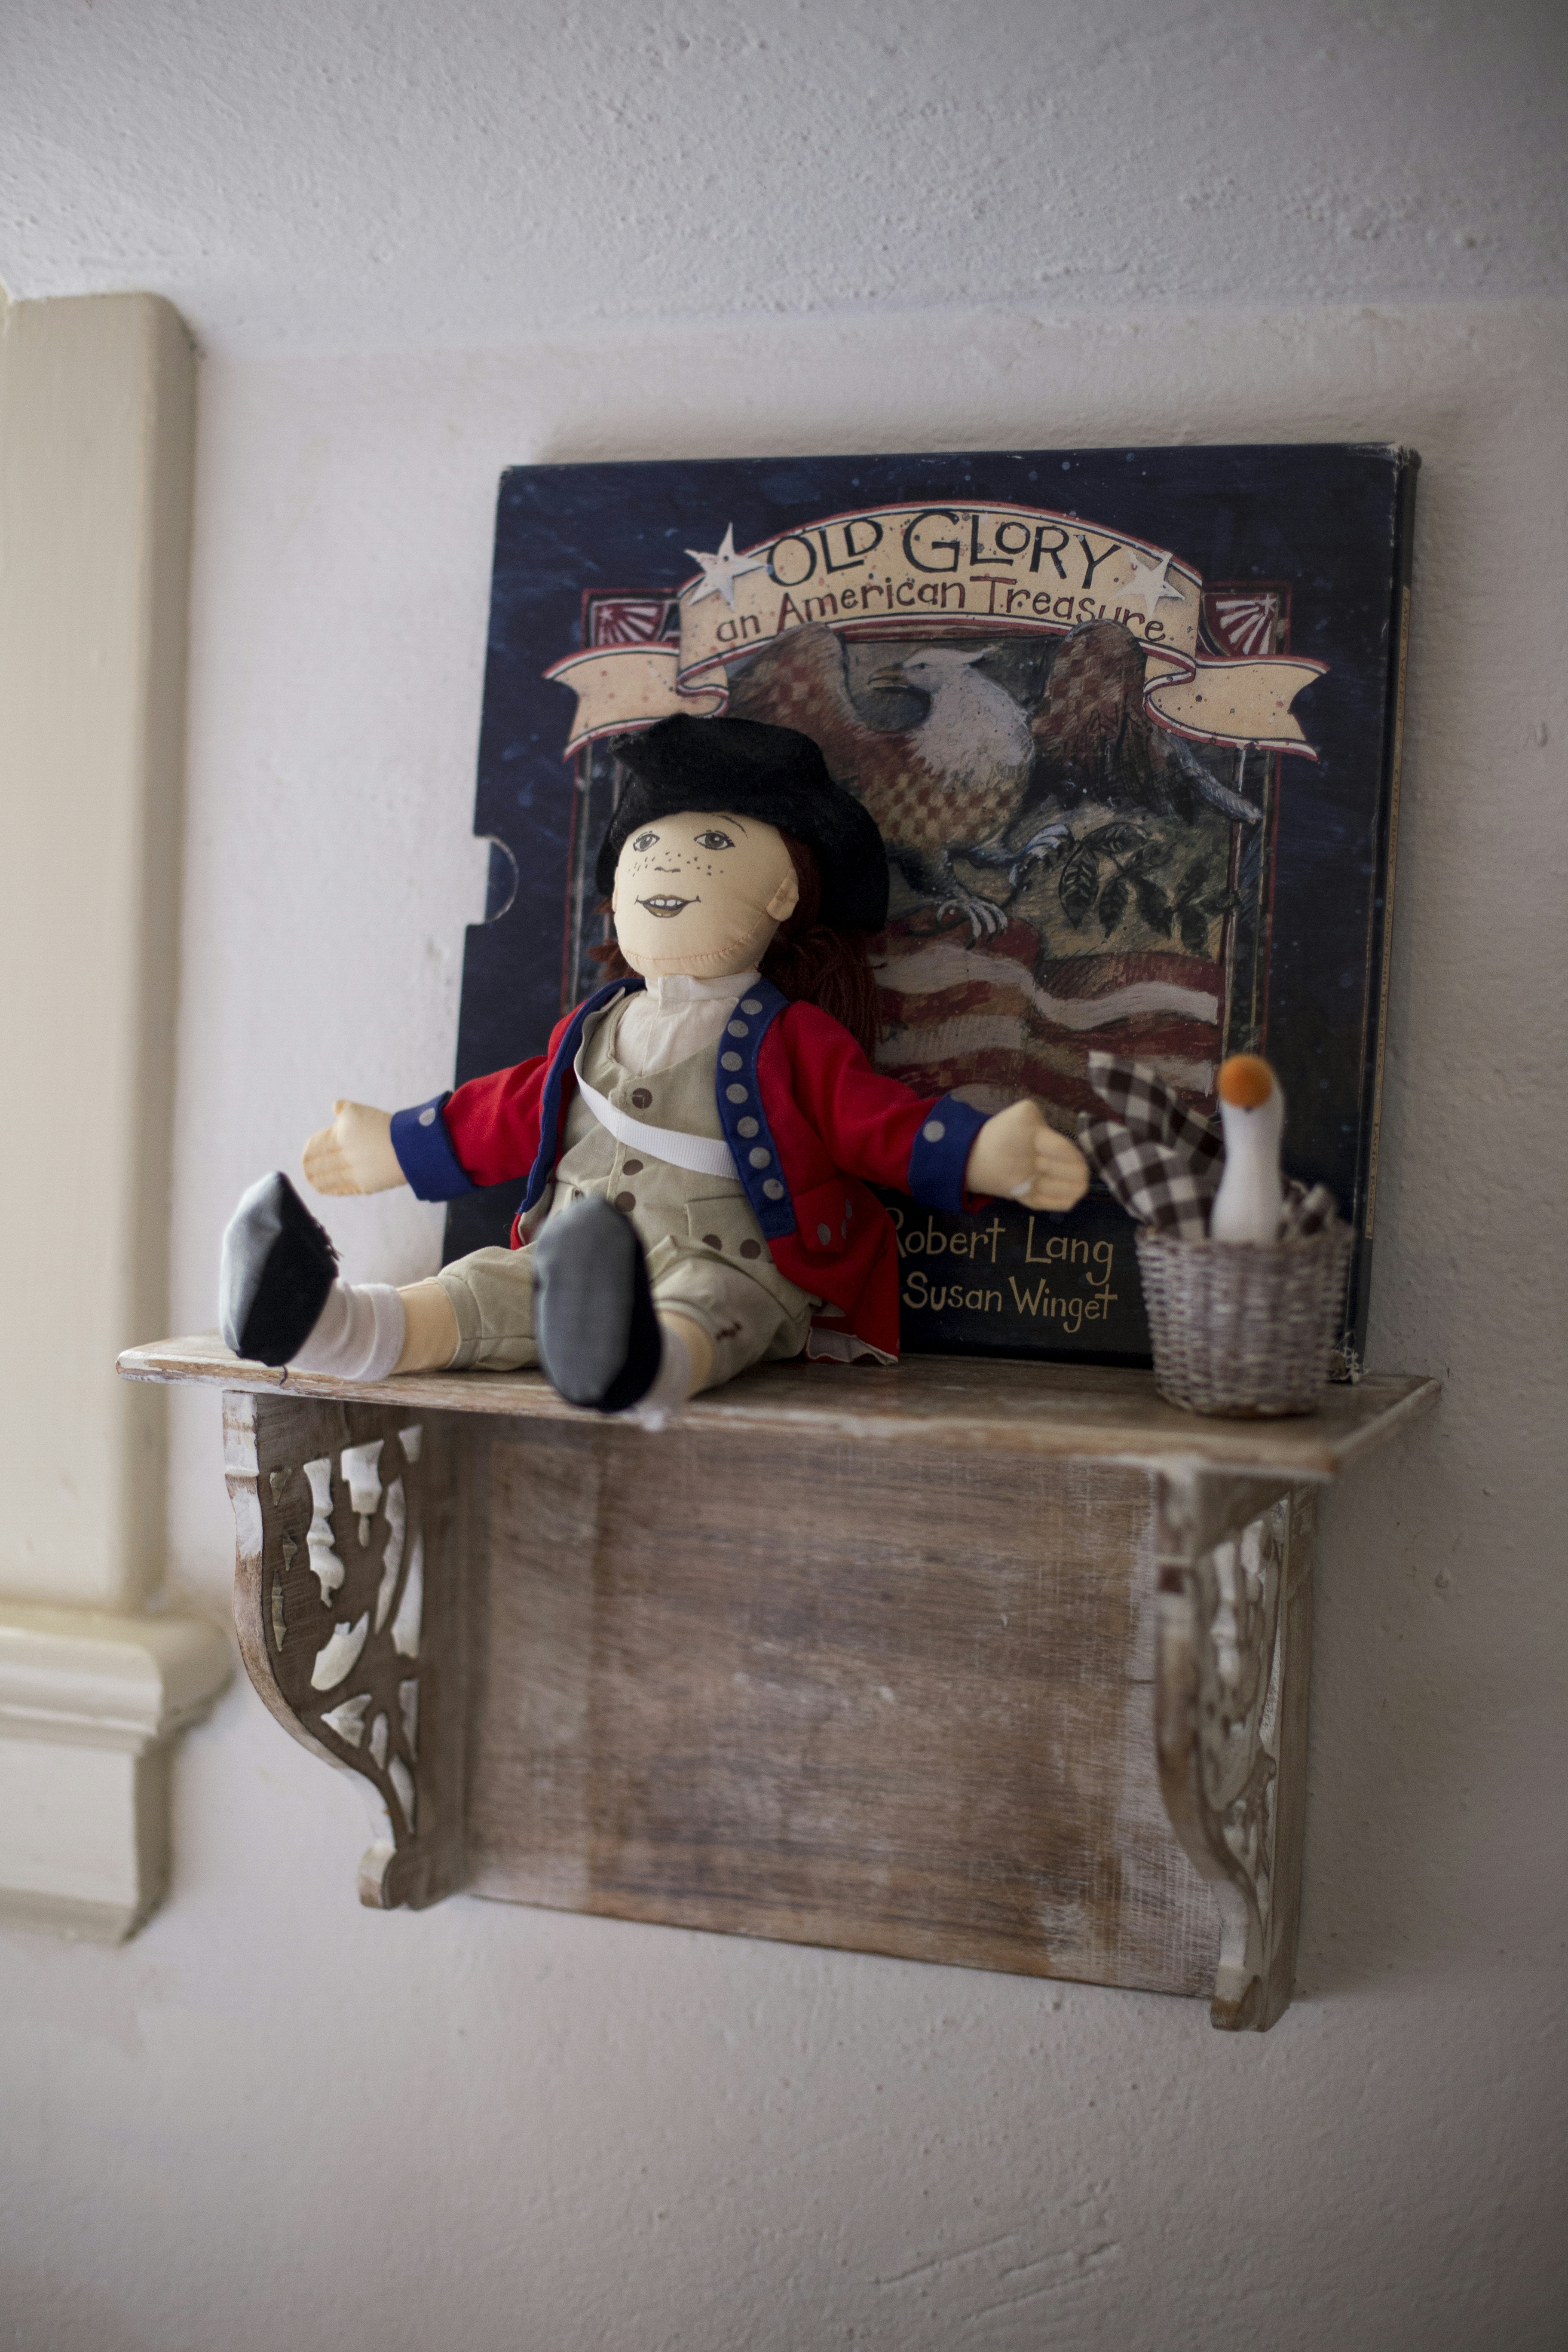 Decorative shelf with Americana items, colonial doll, basket, and Old Glory book